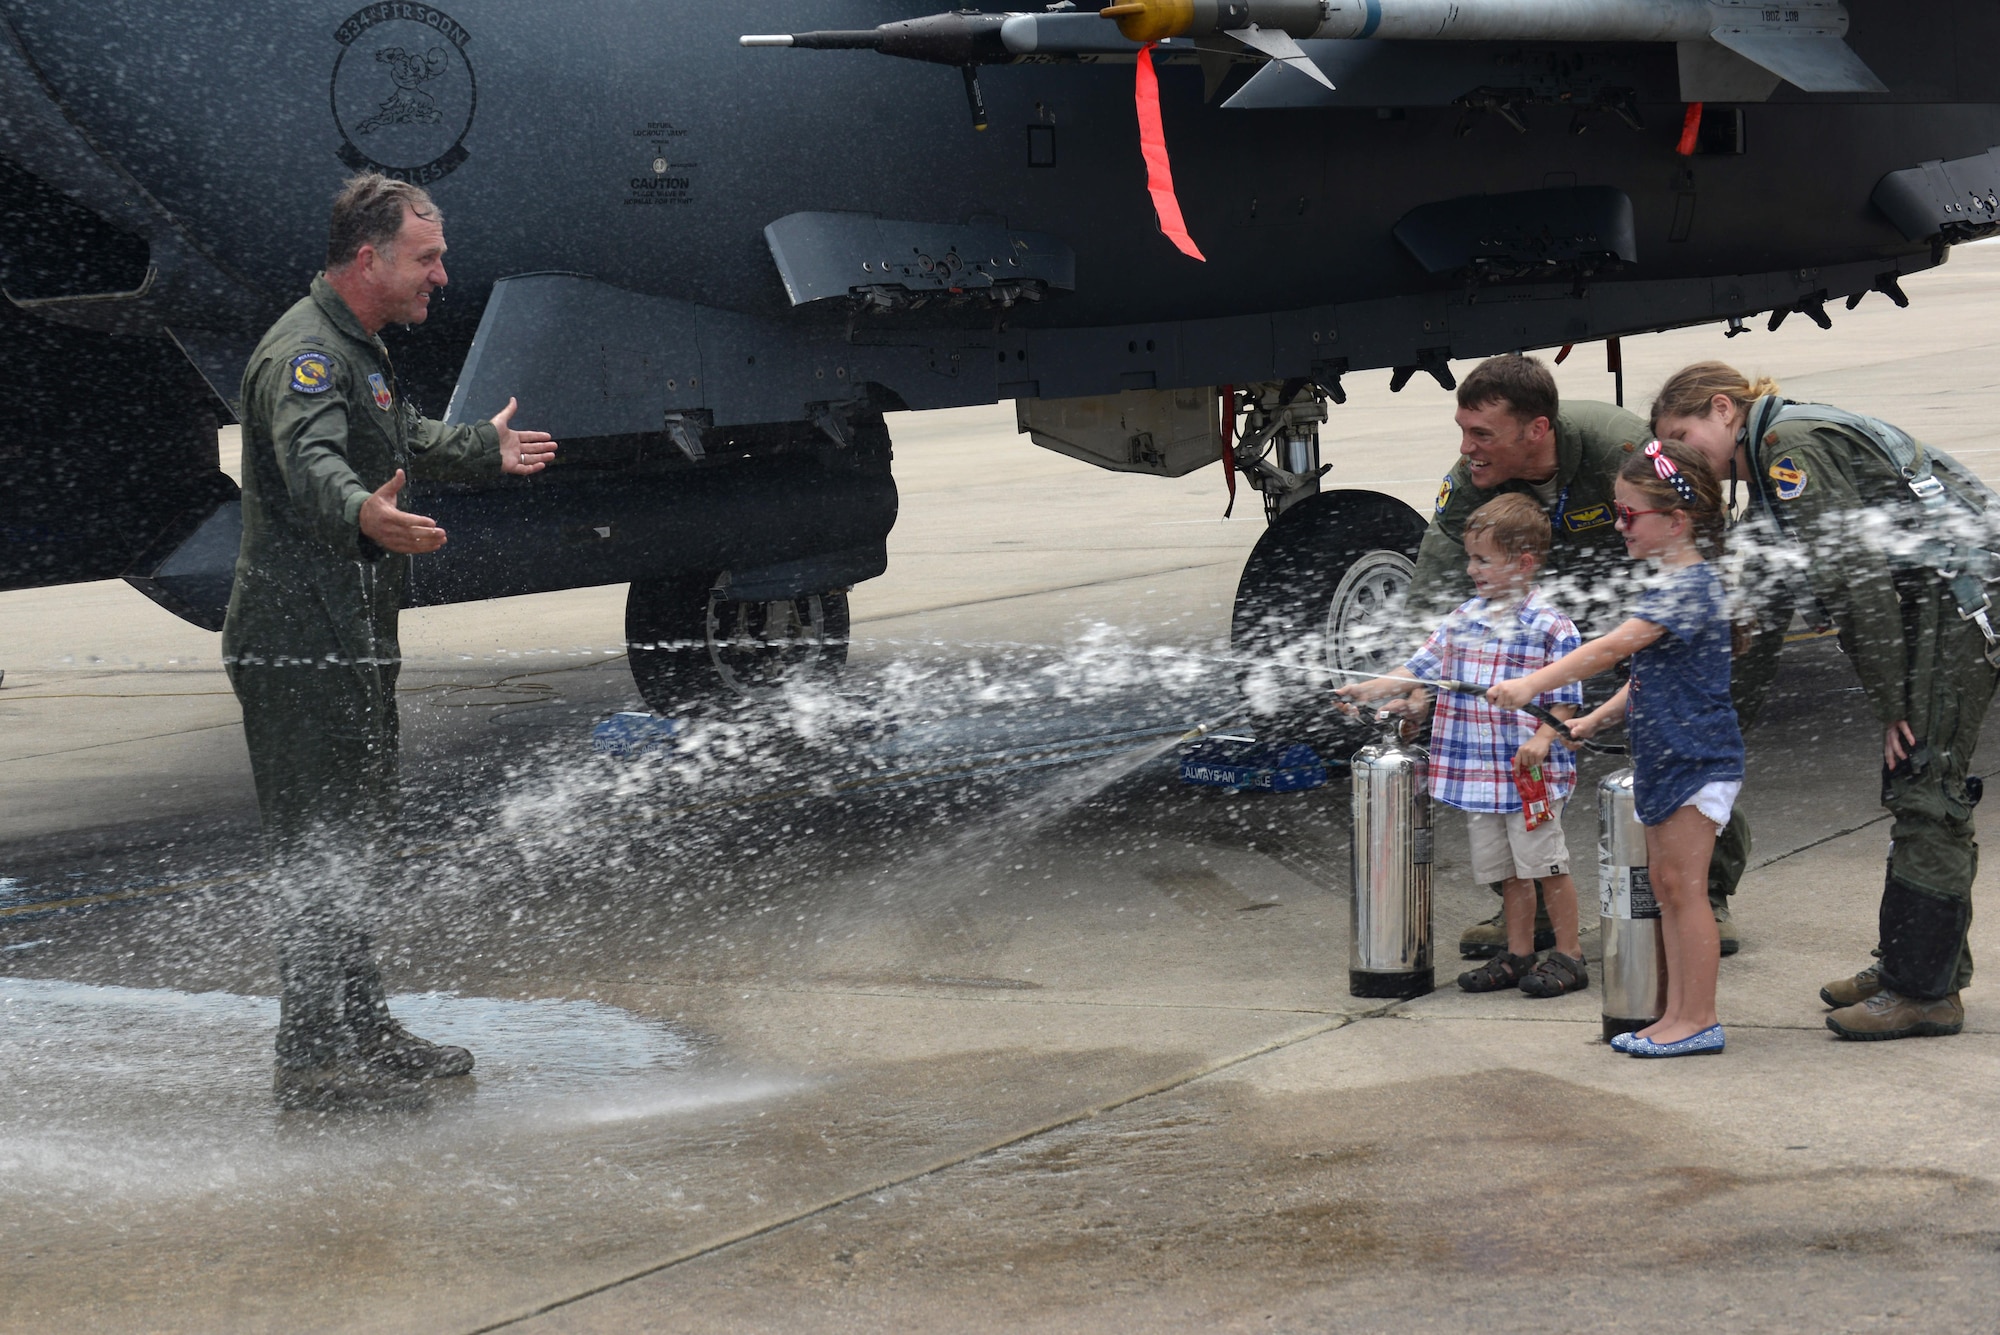 Col. Mark Slocum, 4th Fighter Wing commander, is hosed down by his children following his final flight in an F-15E Strike Eagle, June 16, 2016, at Seymour Johnson Air Force Base, North Carolina. Slocum will be promoted to brigadier general on June 29, 2016, before departing for a position at Royal Air Force Mildenhall, England. (U.S. Air Force photo/Airman 1st Class Ashley Williamson)